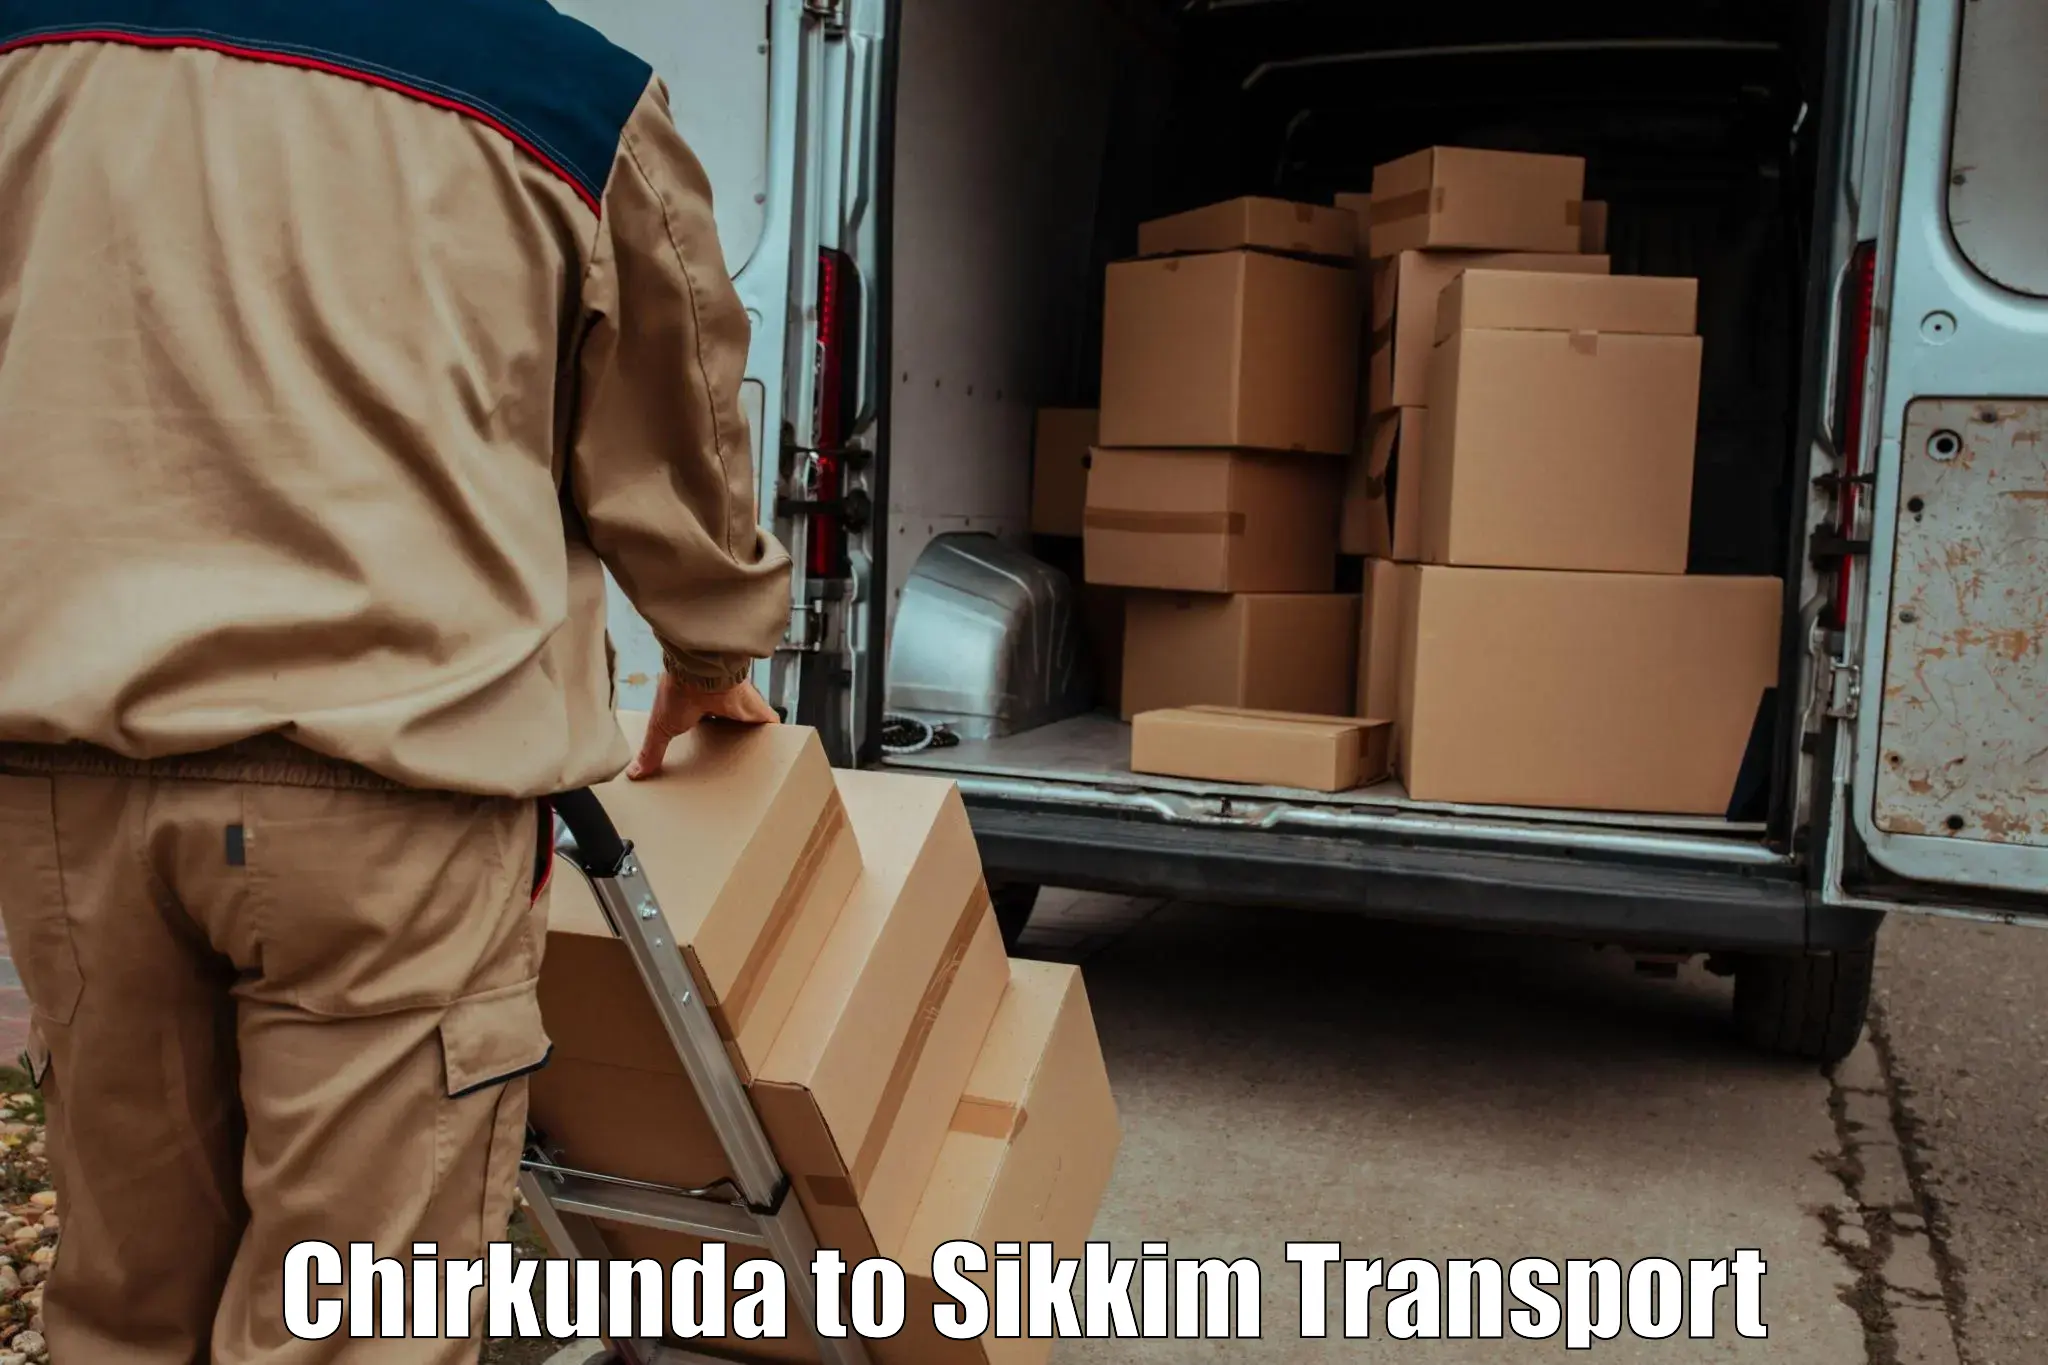 Cycle transportation service Chirkunda to East Sikkim